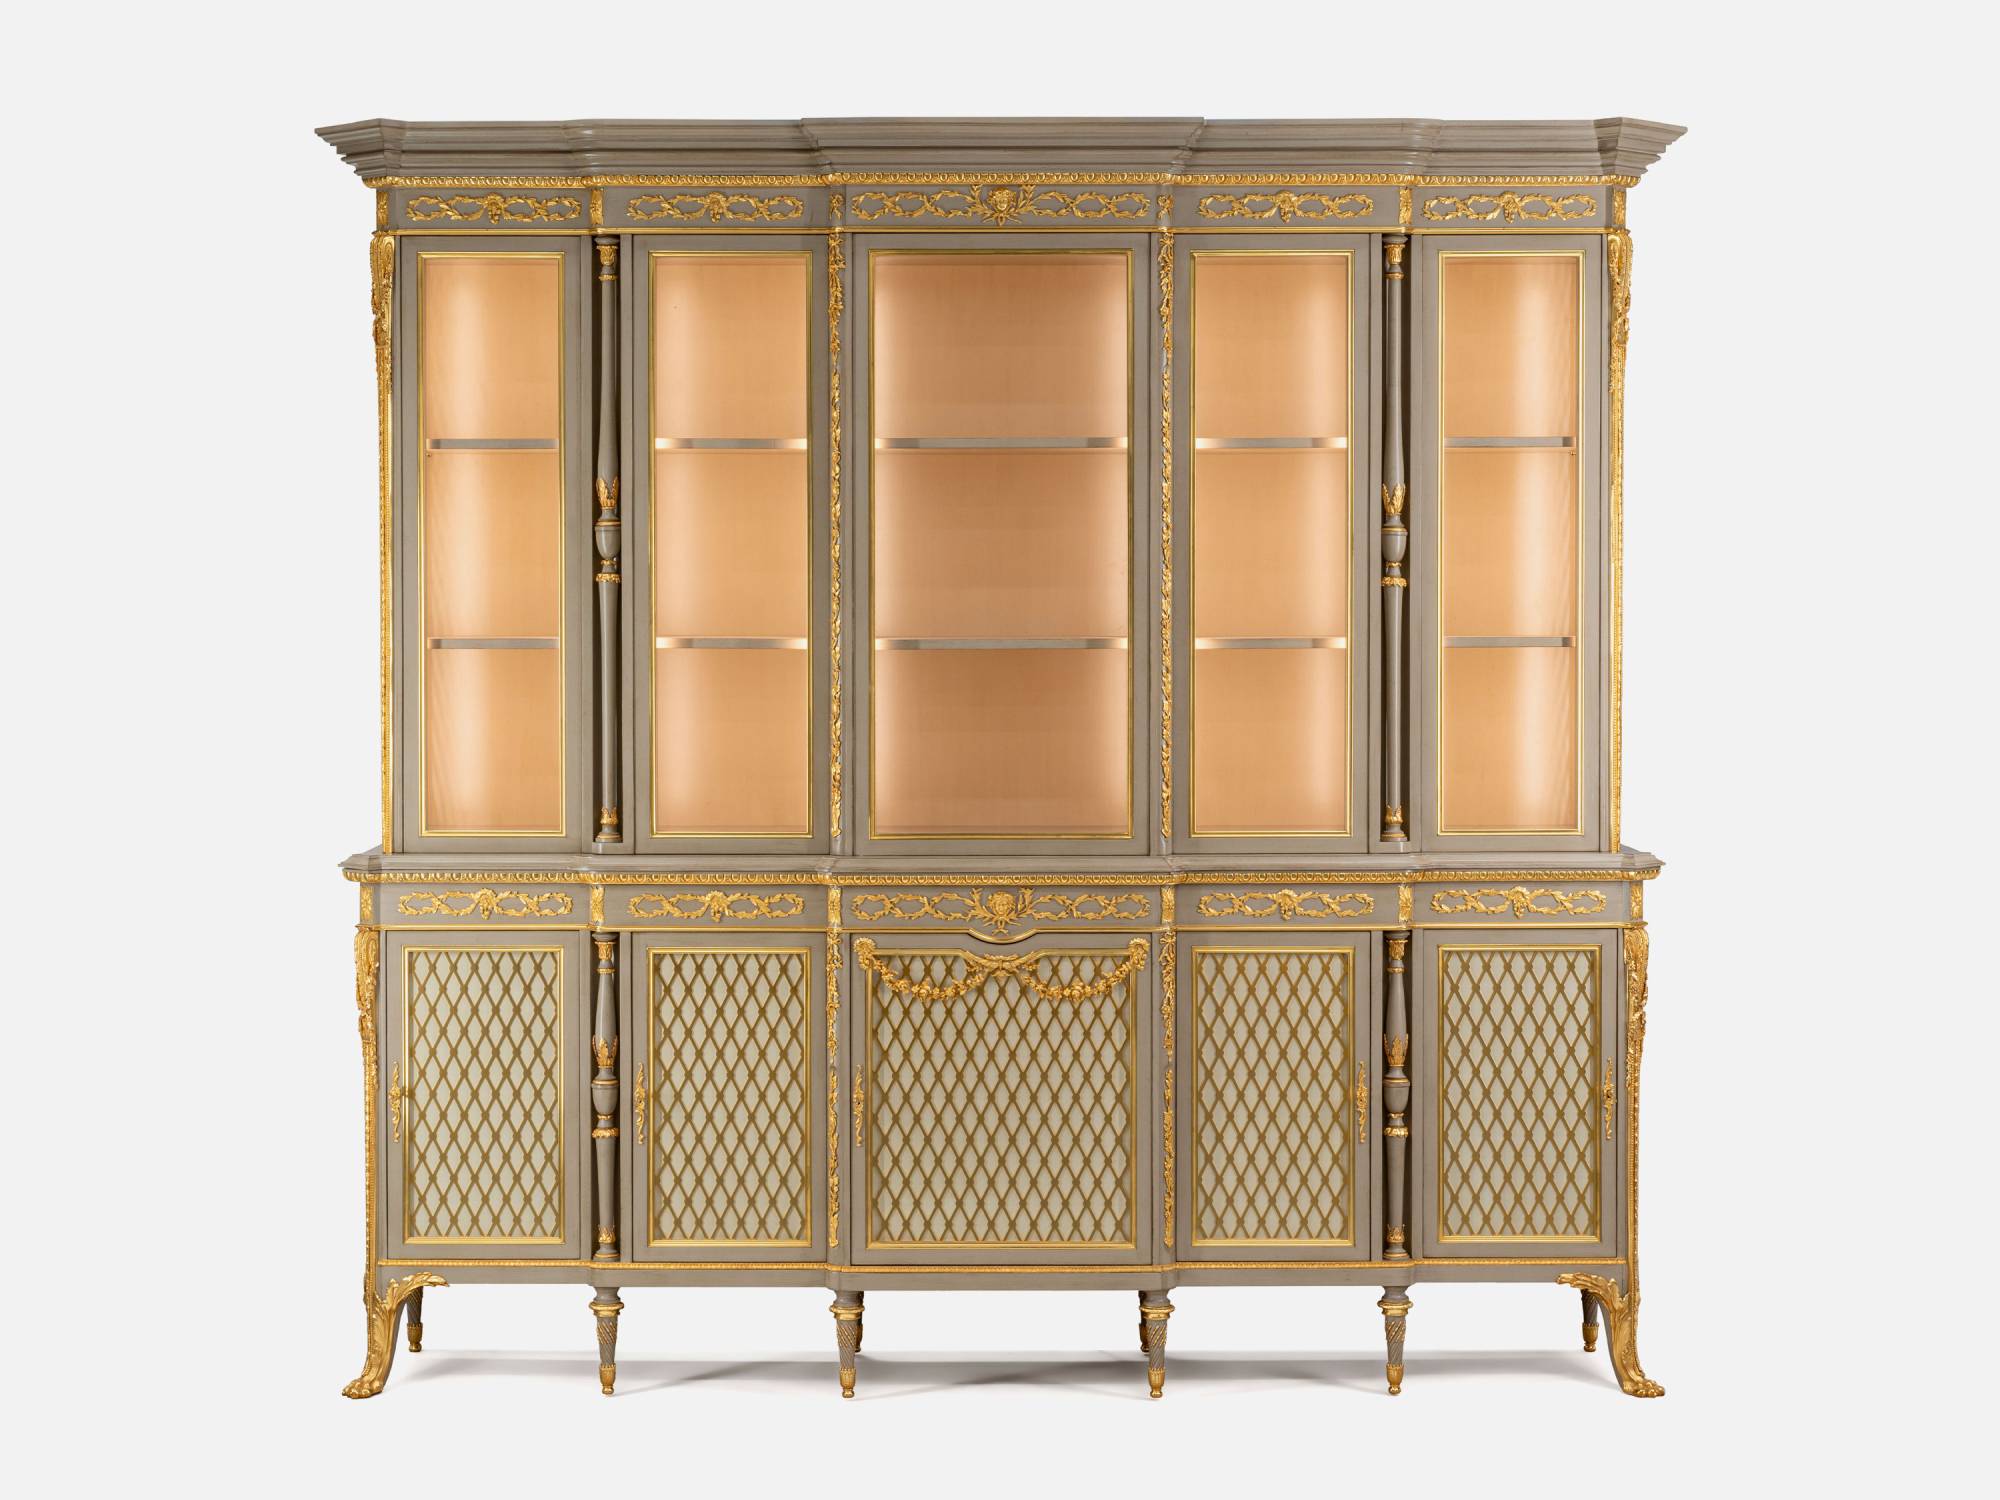 ART.567/V – Discover the elegance of luxury classic Showcases and Bookcases made in Italy by C.G. Capelletti. Luxury classic furniture that combines style and craftsmanship.